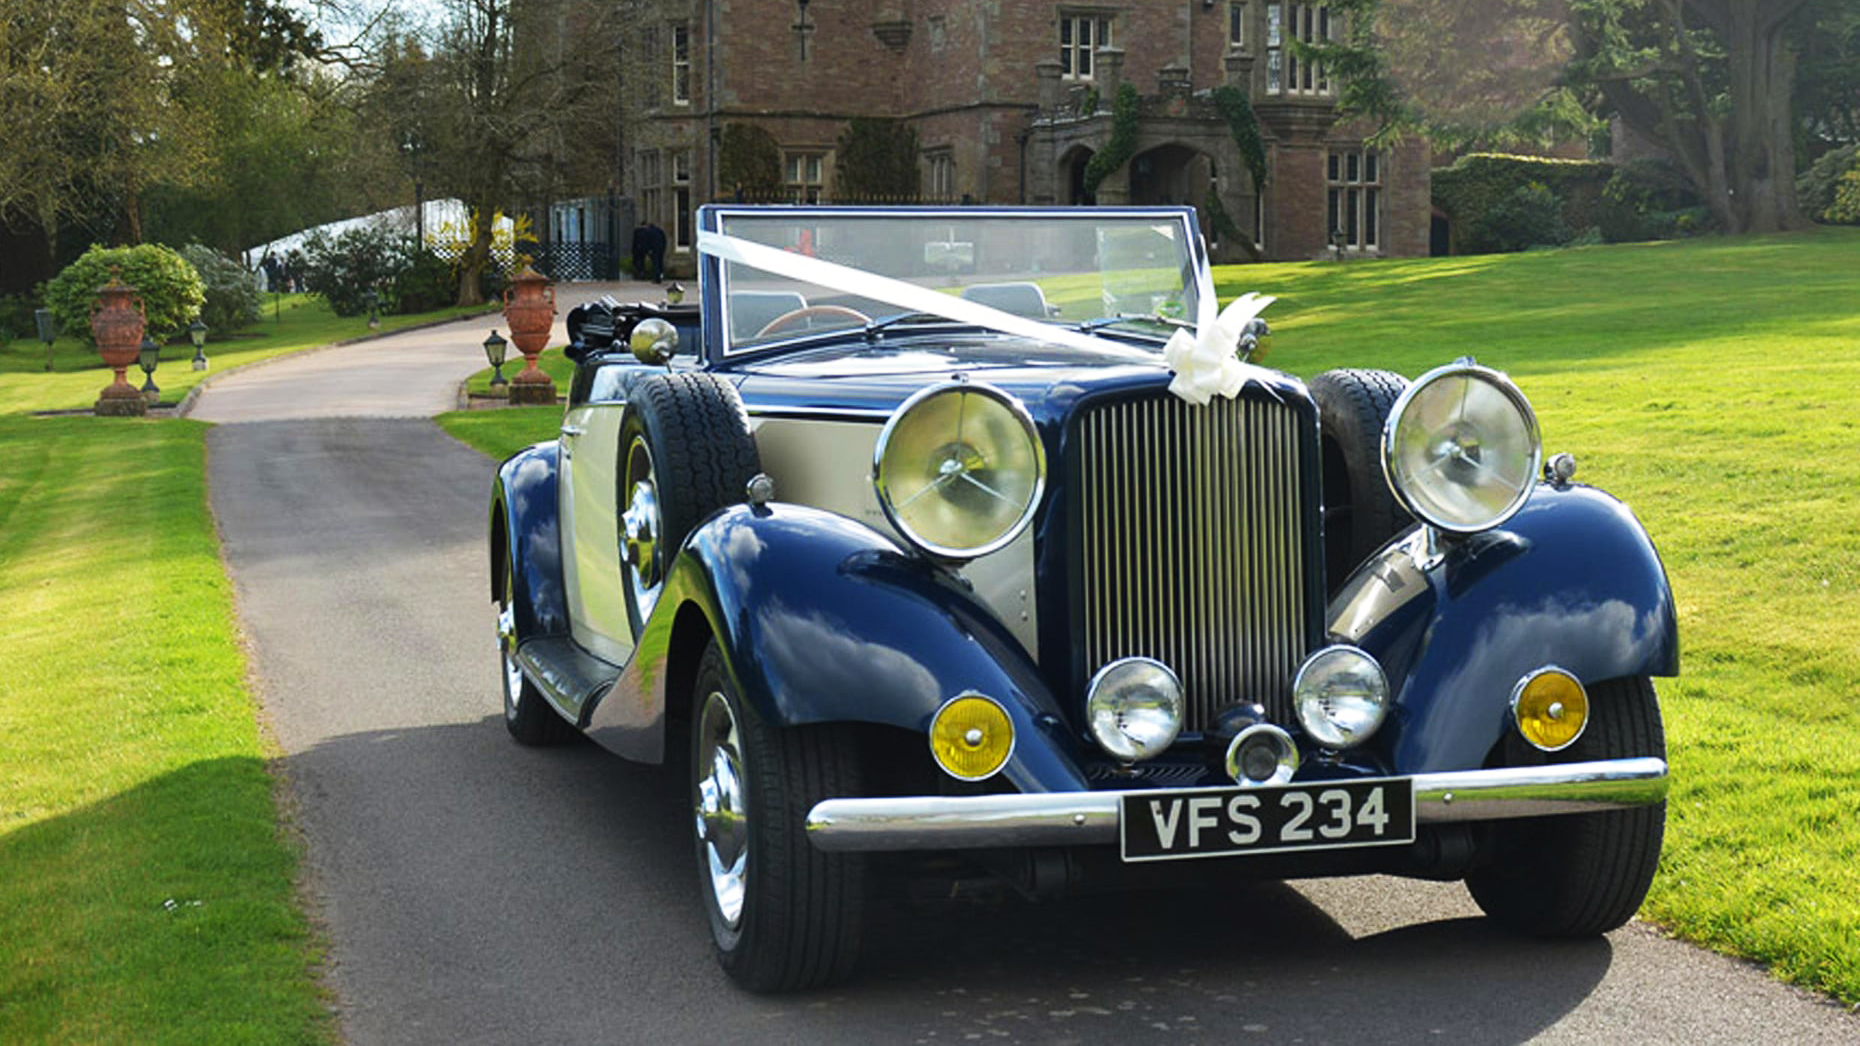 Blue and Ivory vintage Jaguar Drophead on the driveway of a local wedding venue inMelton Mowbray.